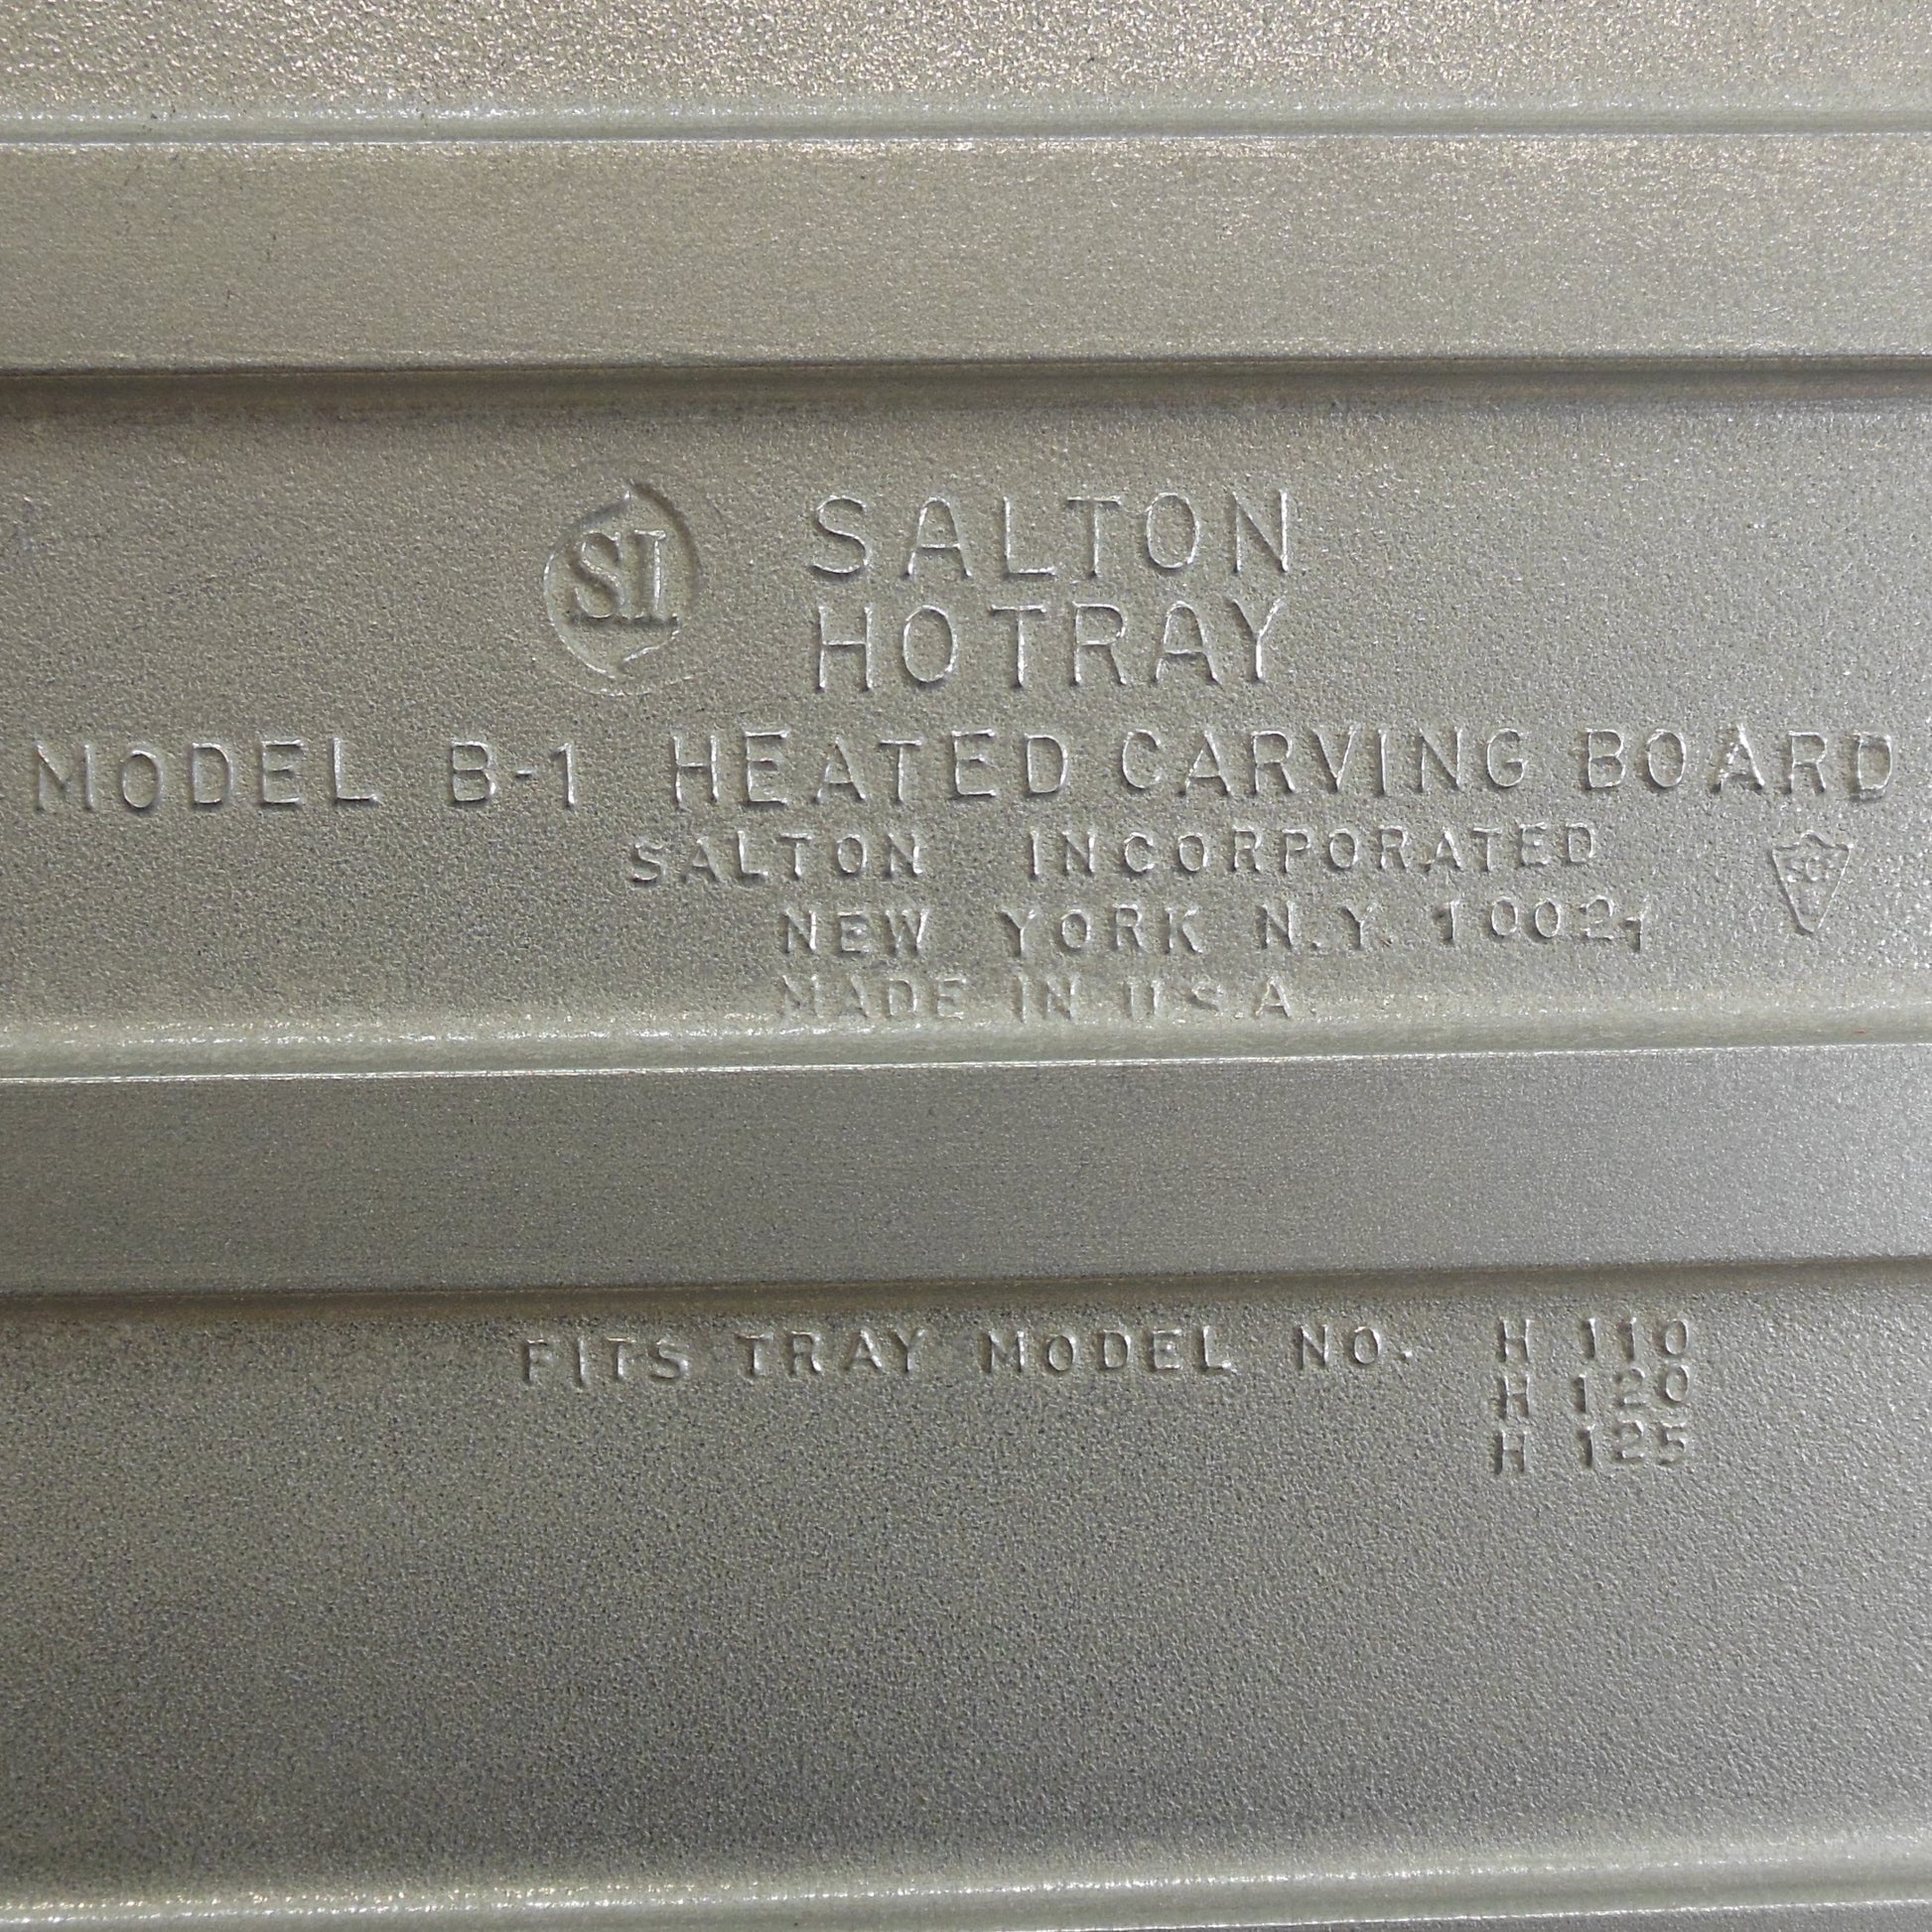 Salton Hotray USA Aluminum B-1 Hot-Slice Carving Board for H110 H120 H125 Used